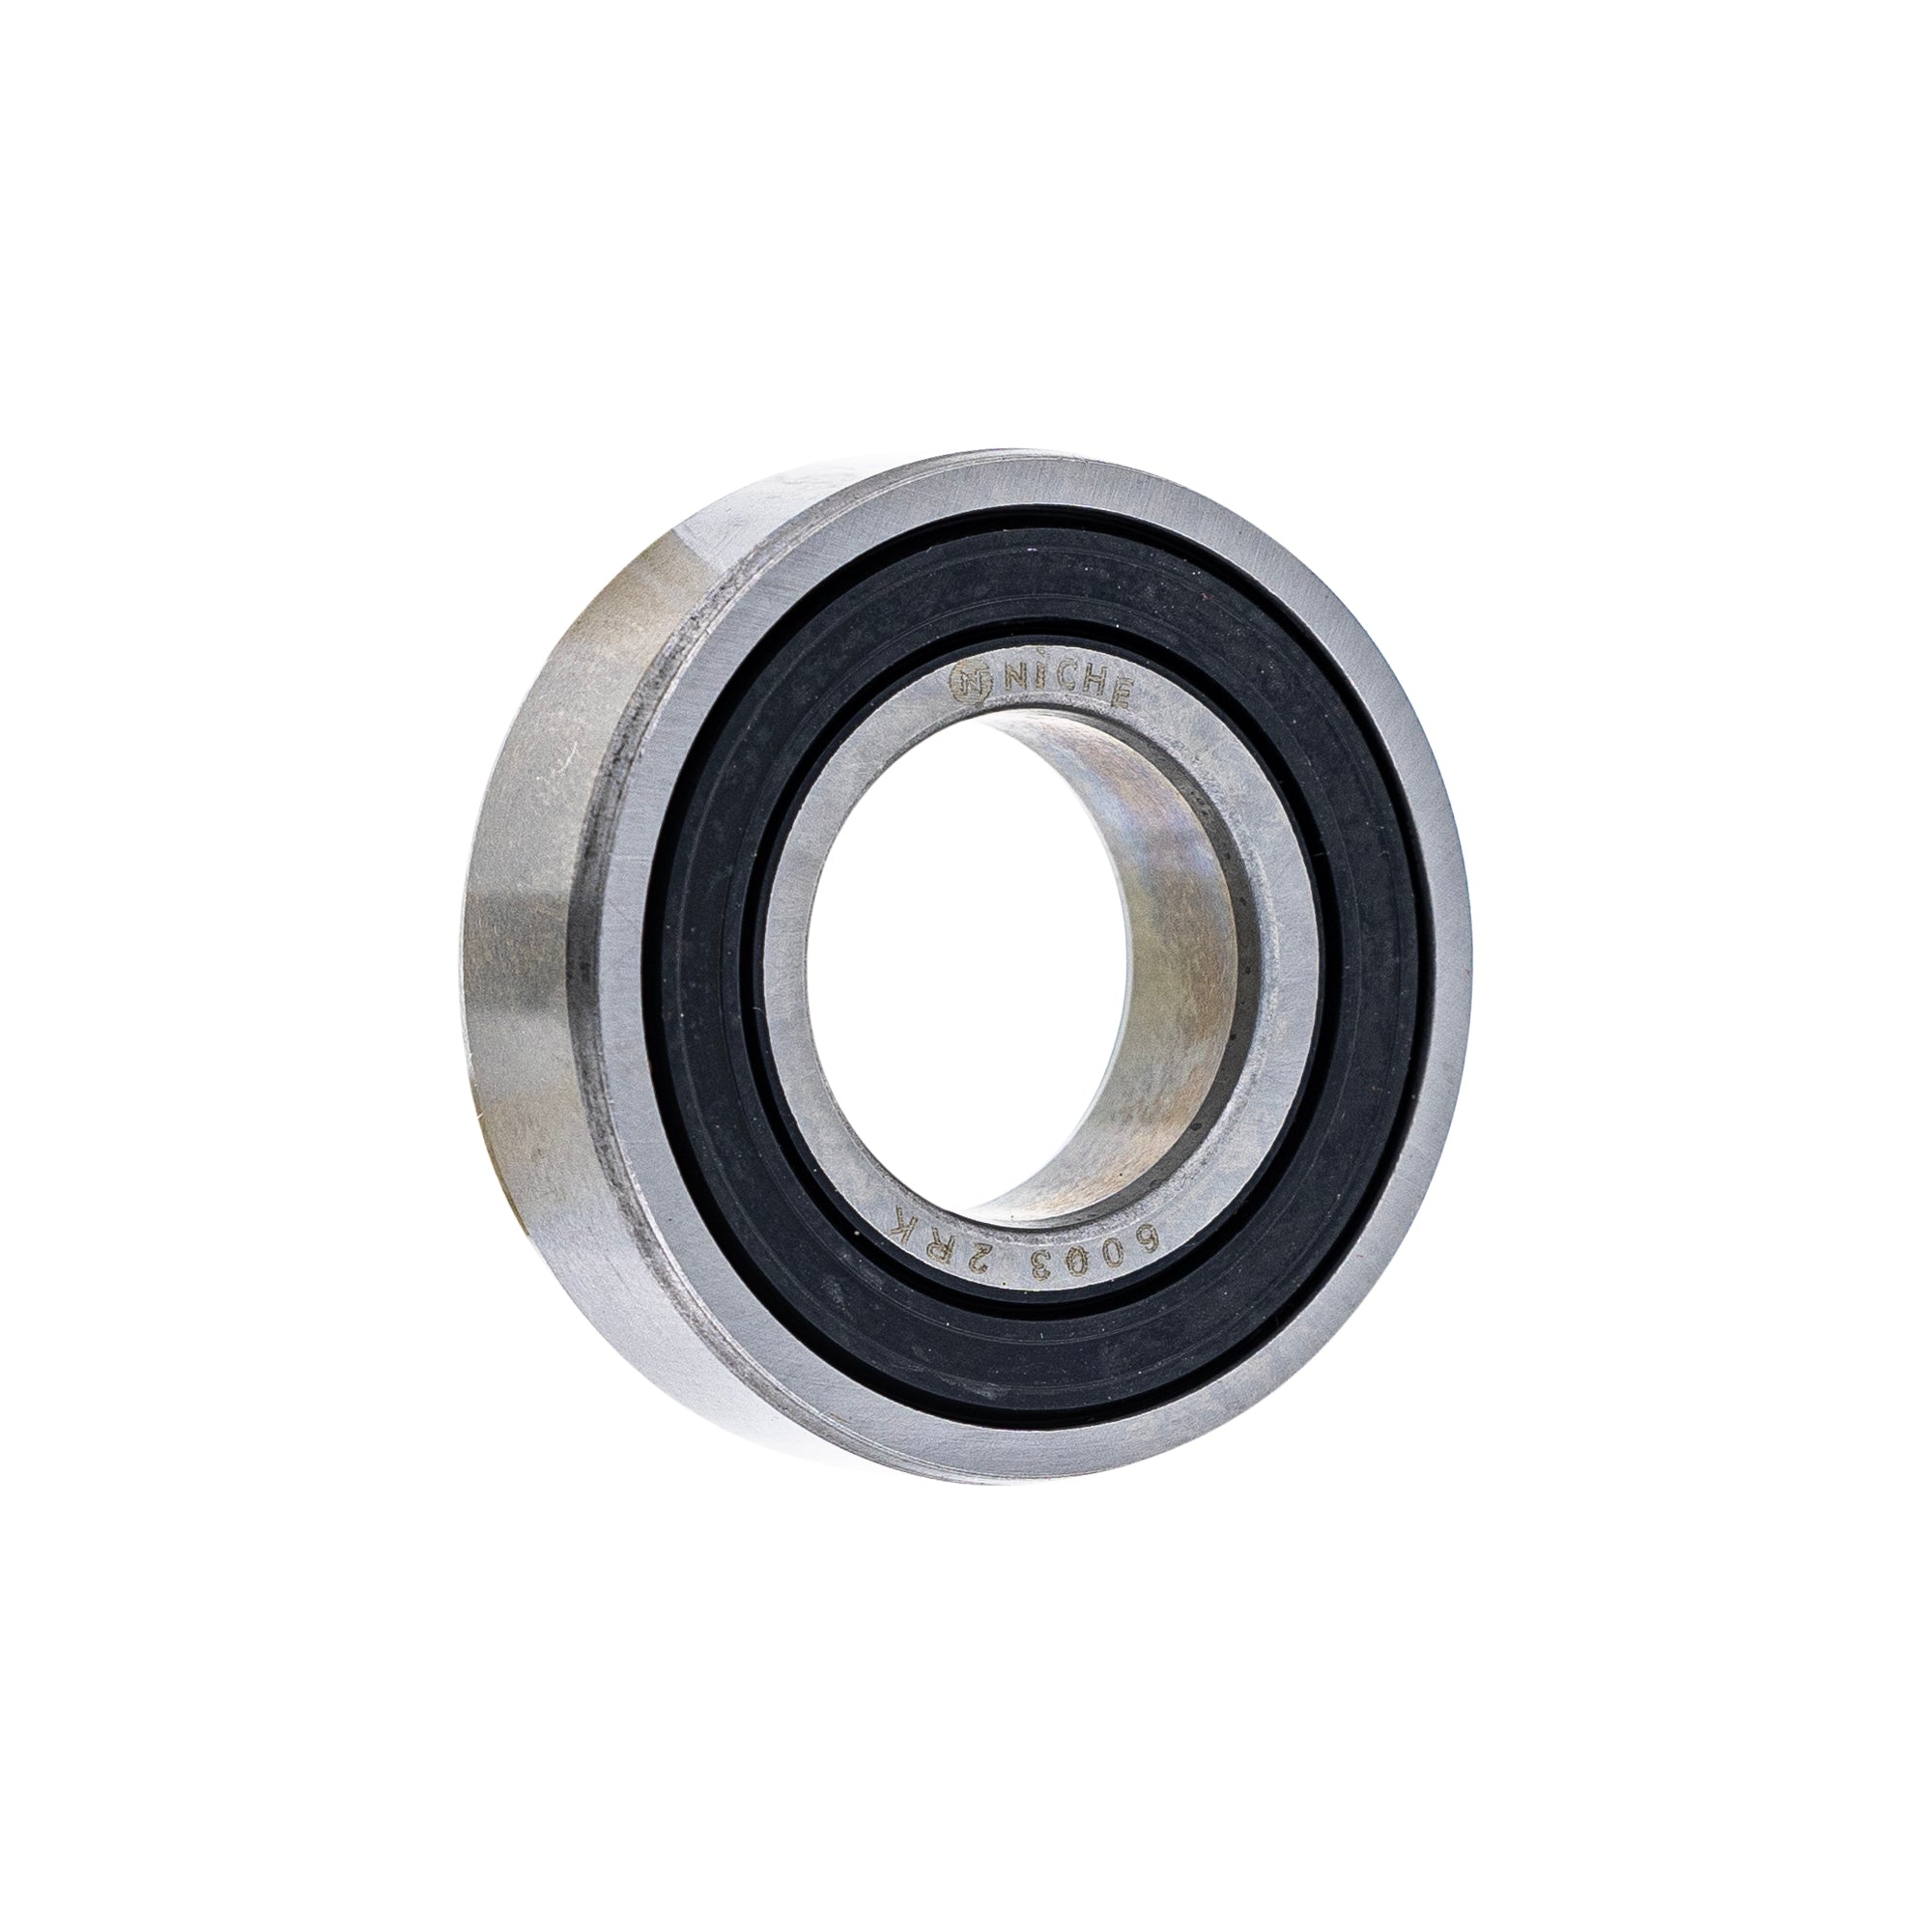 Electric Grade, Single Row, Deep Groove, Ball Bearing for zOTHER Arctic Cat Textron YZ250 NICHE 519-CBB2325R